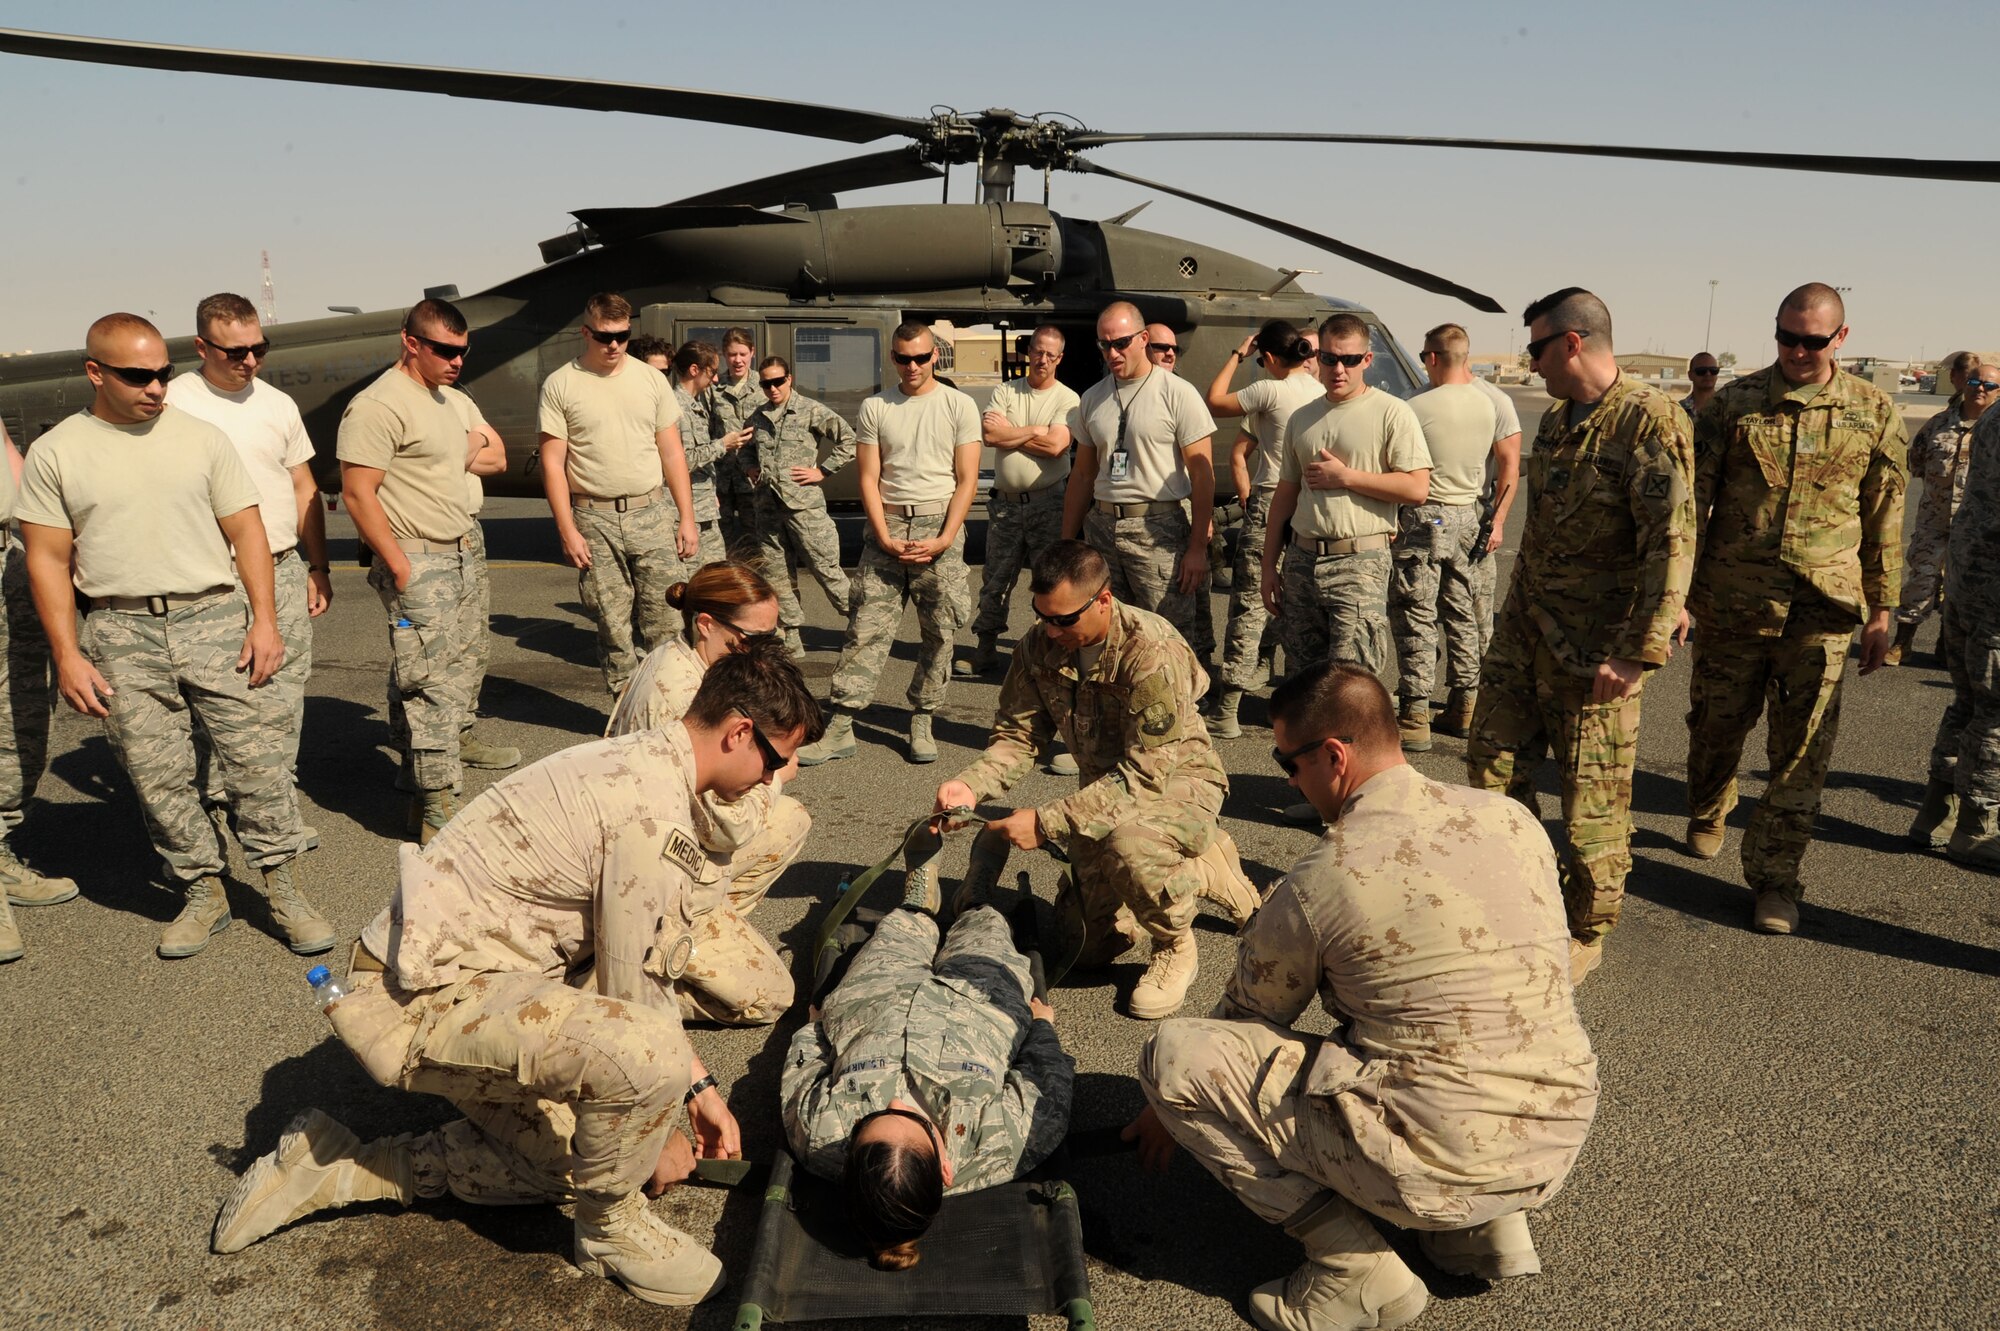 A carry team comprised of Canadian medical personnel and Staff Sgt. Jack Ulrey, 386th Expeditionary Medical Group lab technician, strap down a simulated patient during medical evacuation training Oct. 14, 2016 at an undisclosed location in Southwest Asia. The purpose of the training was to expand mission capabilities and enhance relationships between joint and coalition partners. (U.S. Air Force photo/Senior Airman Zachary Kee)